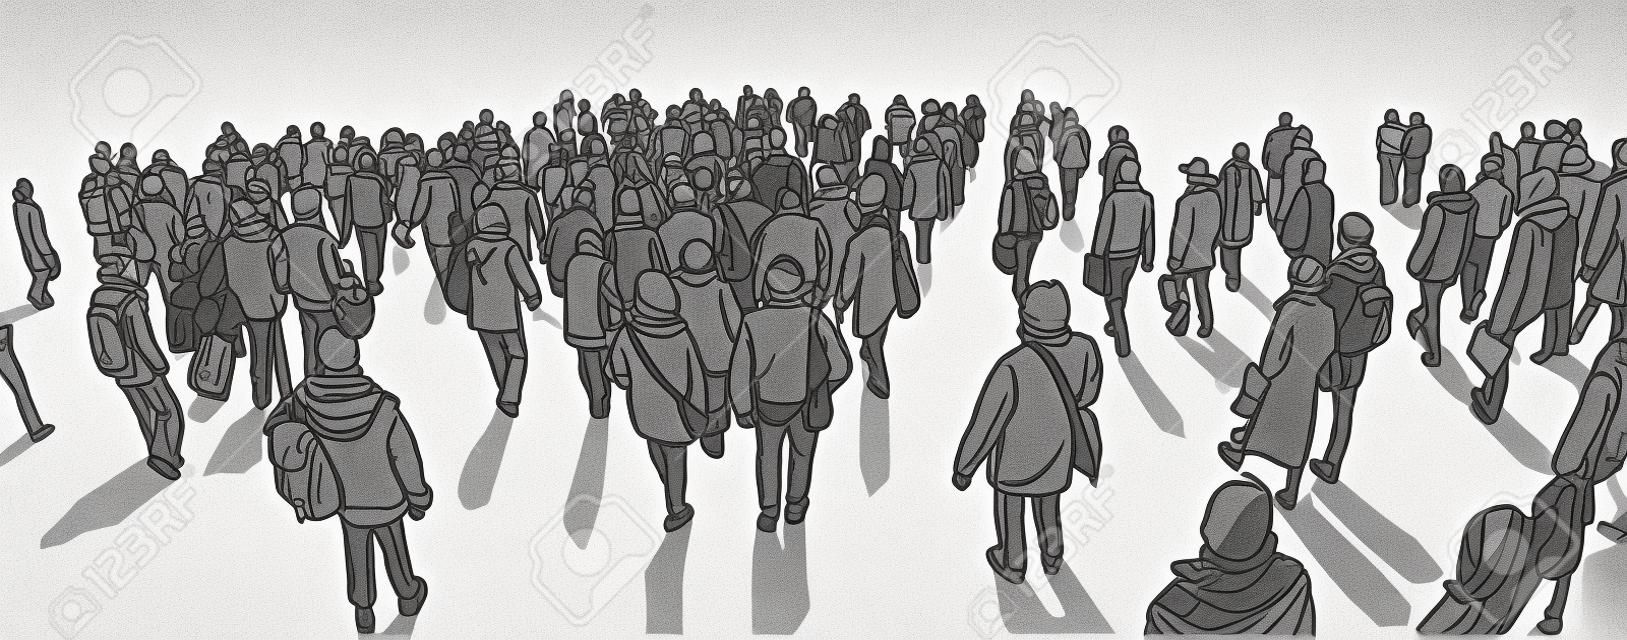 Illustration of large city crowd walking in perspective in black and white grey scale